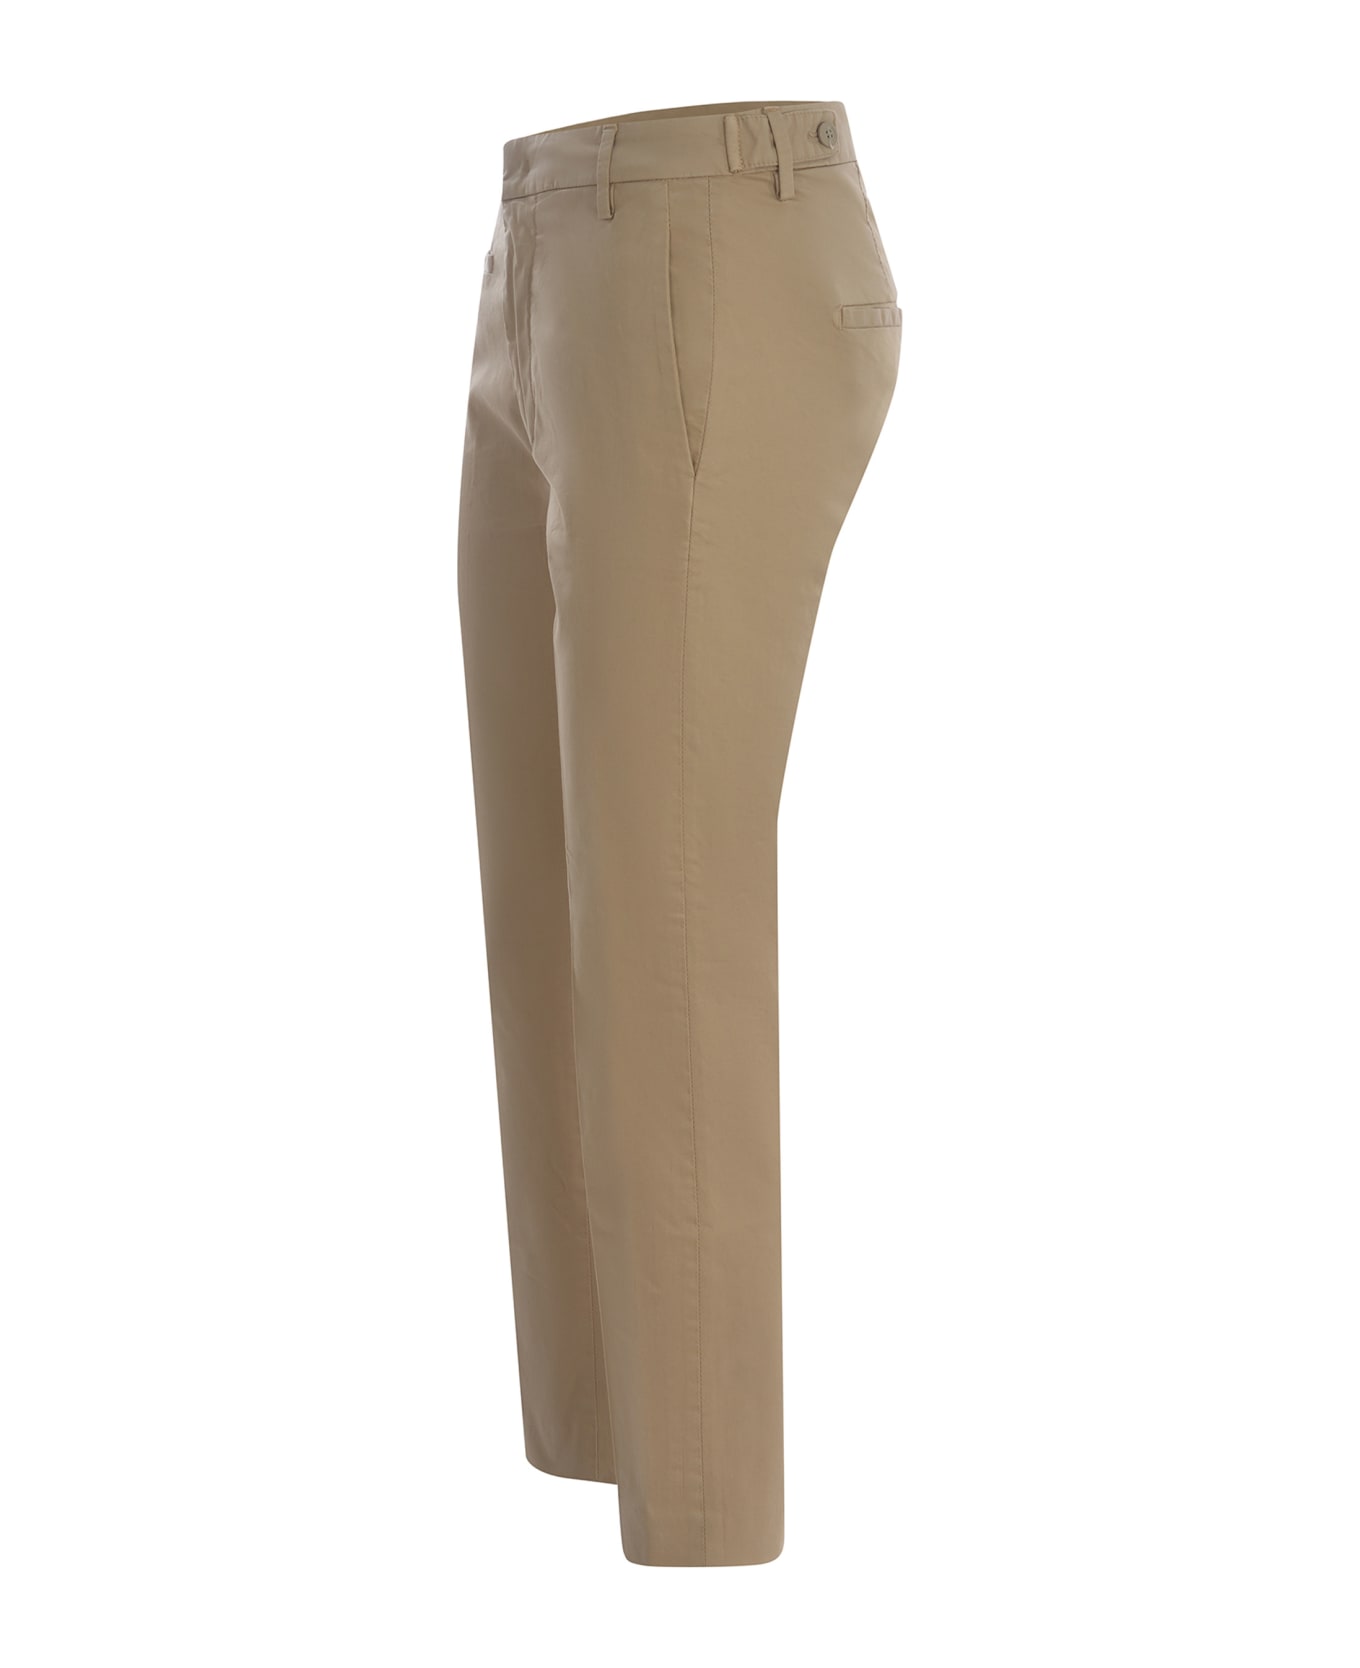 Dondup Trousers Dondup "ariel" Trousers Made Of Cotton - Beige